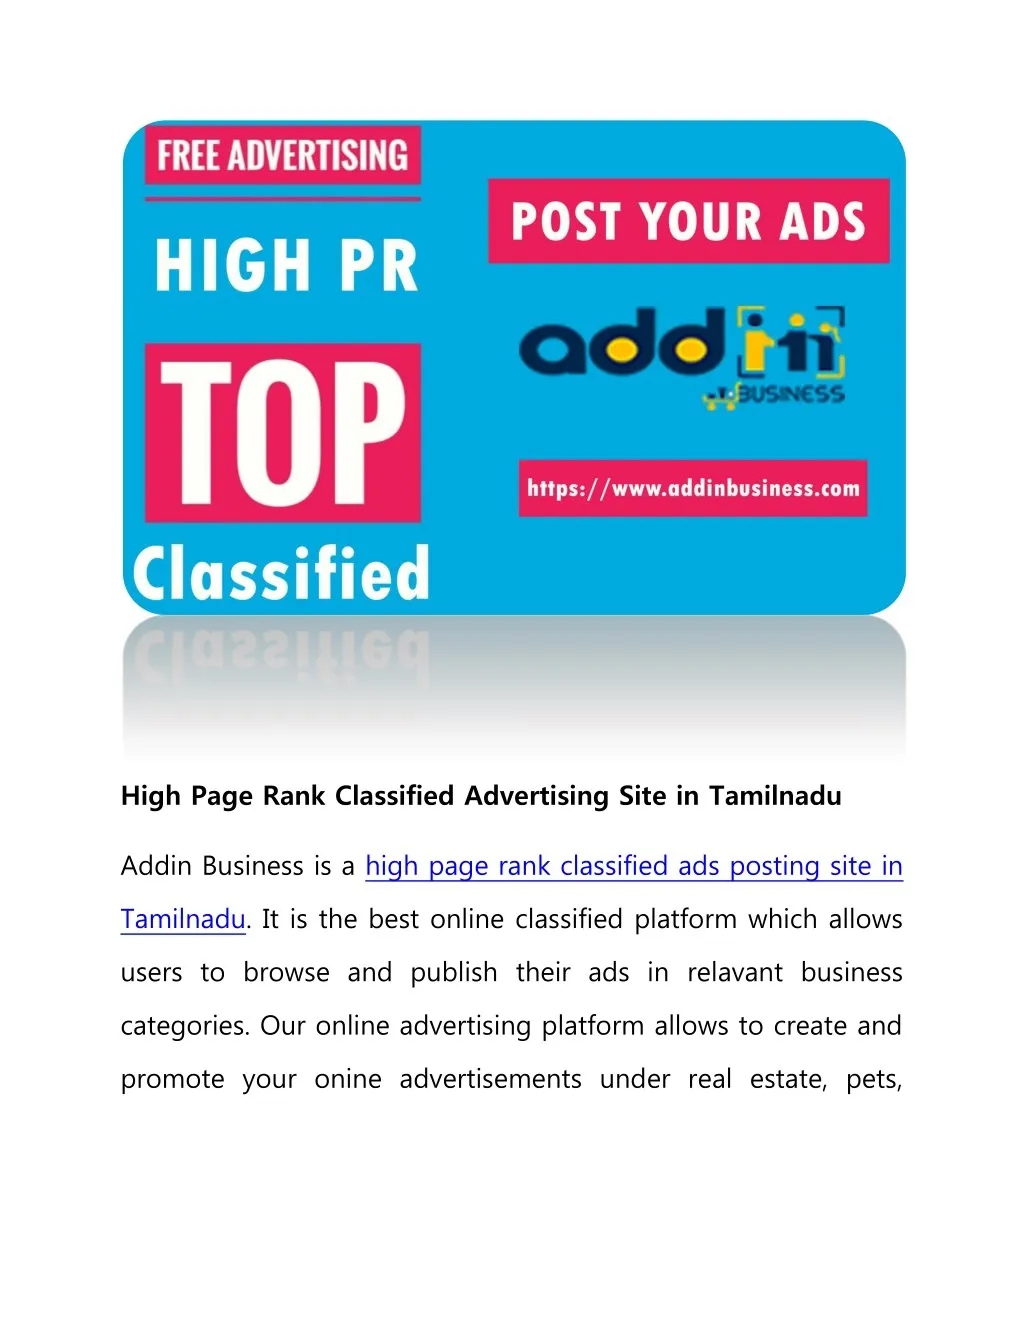 high page rank classified advertising site